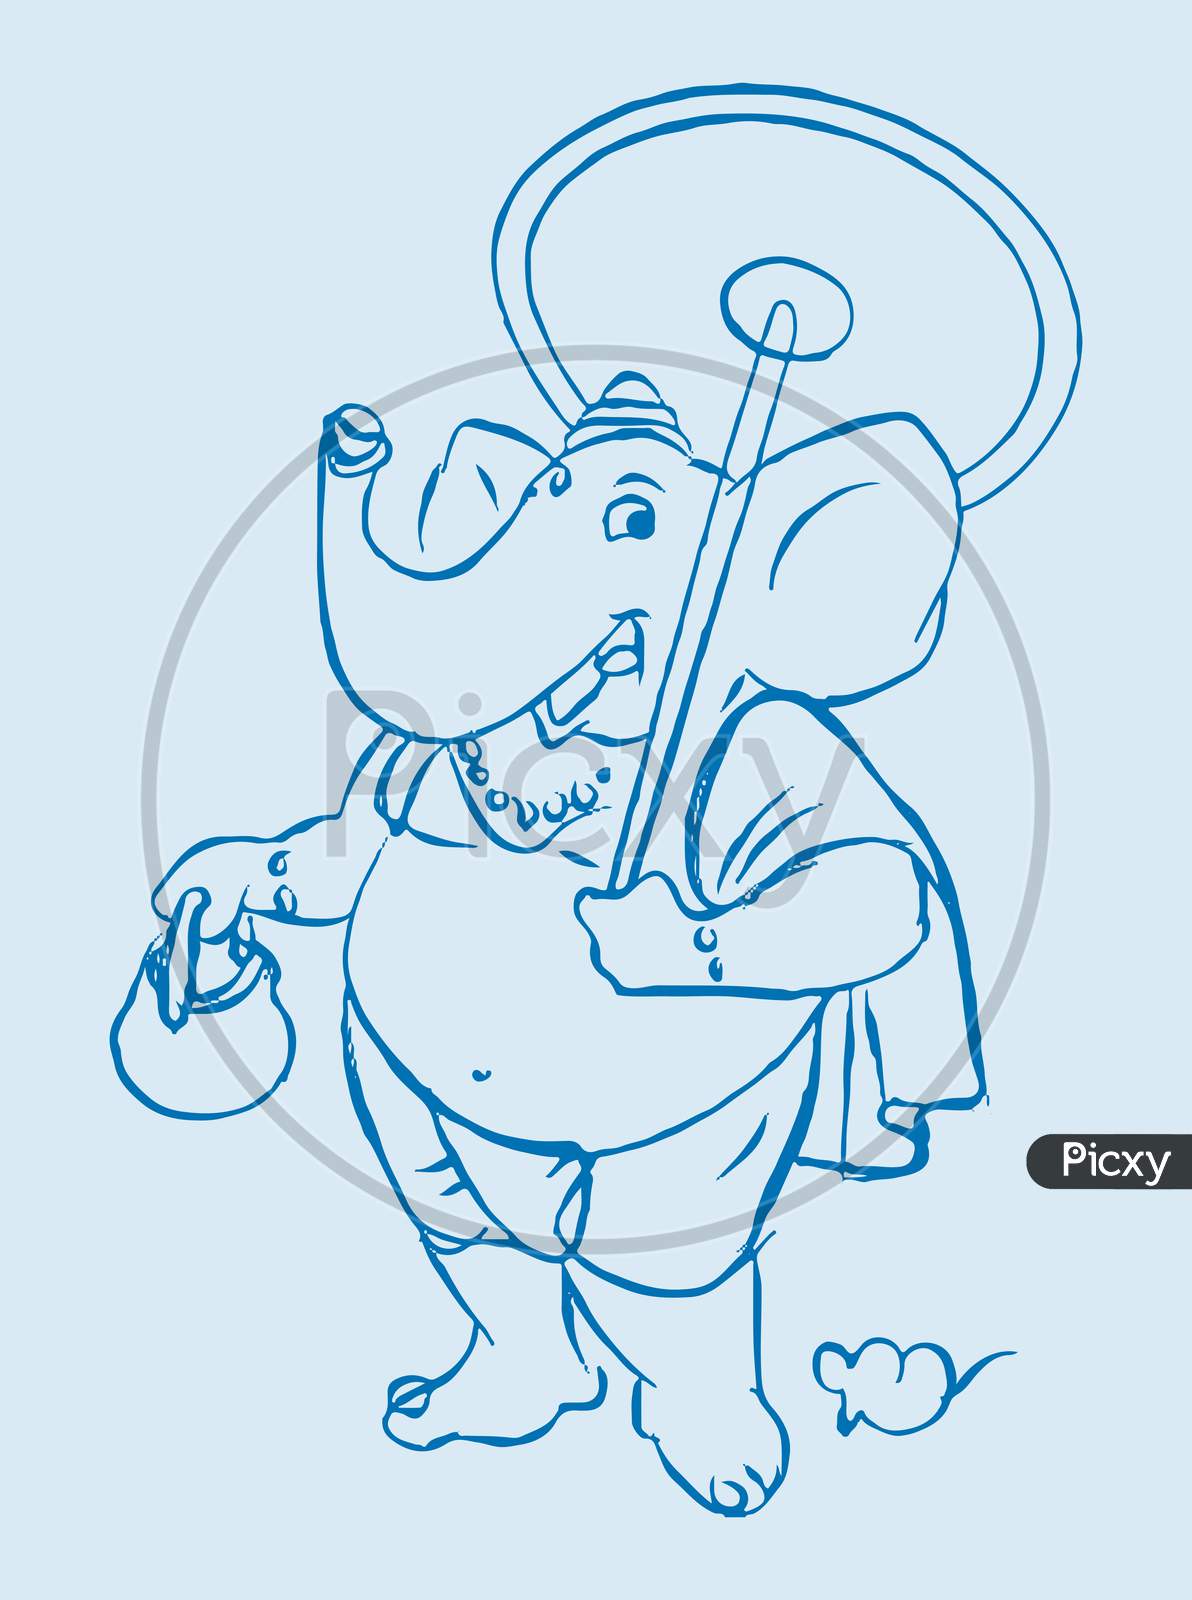 Sketch of Lord Ganesha silhouette and outline editable illustration